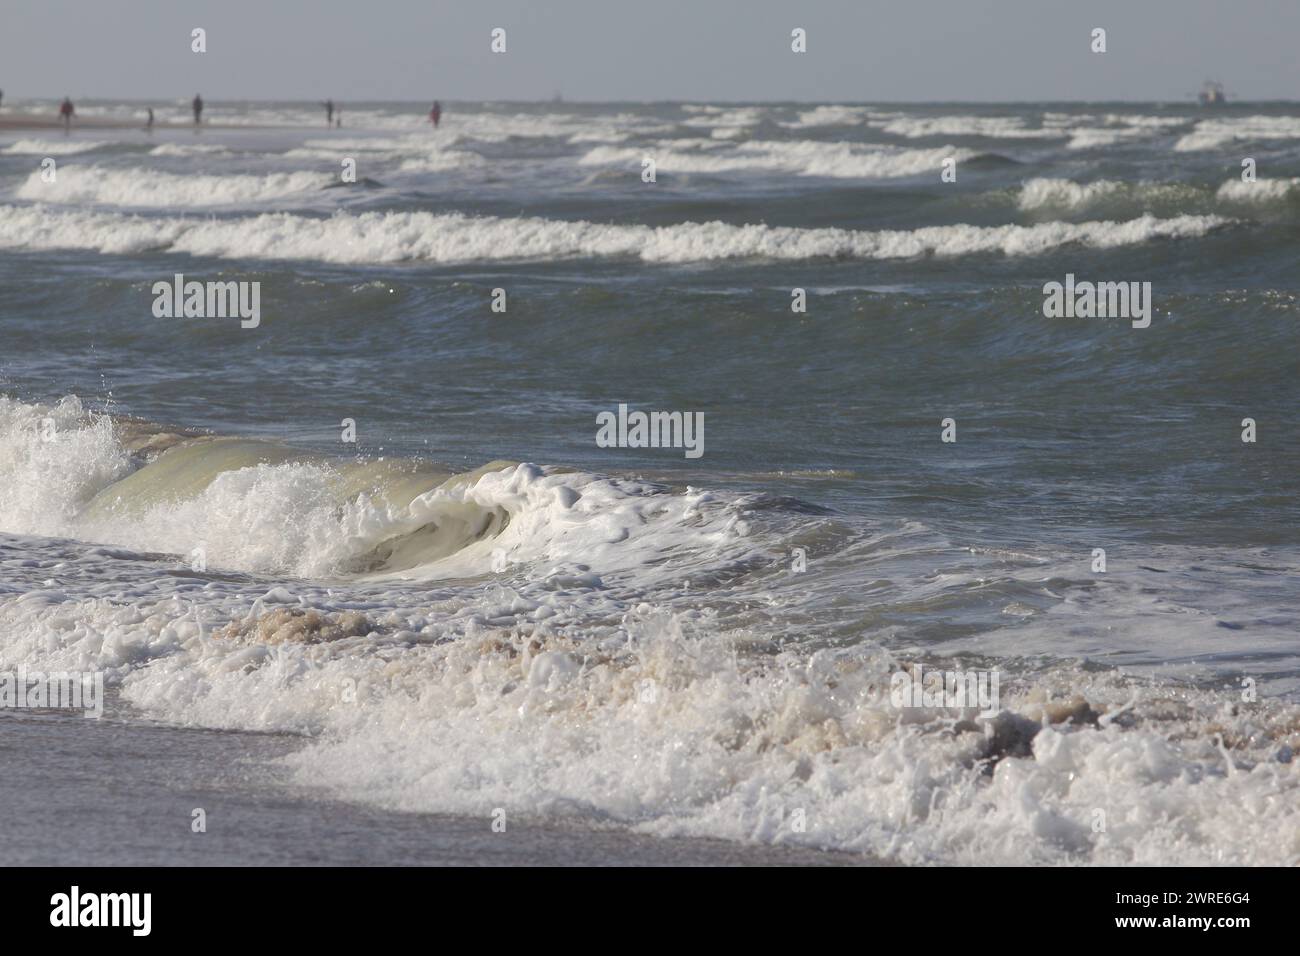 Waves of white foam Crown roll over the sea surface Stock Photo